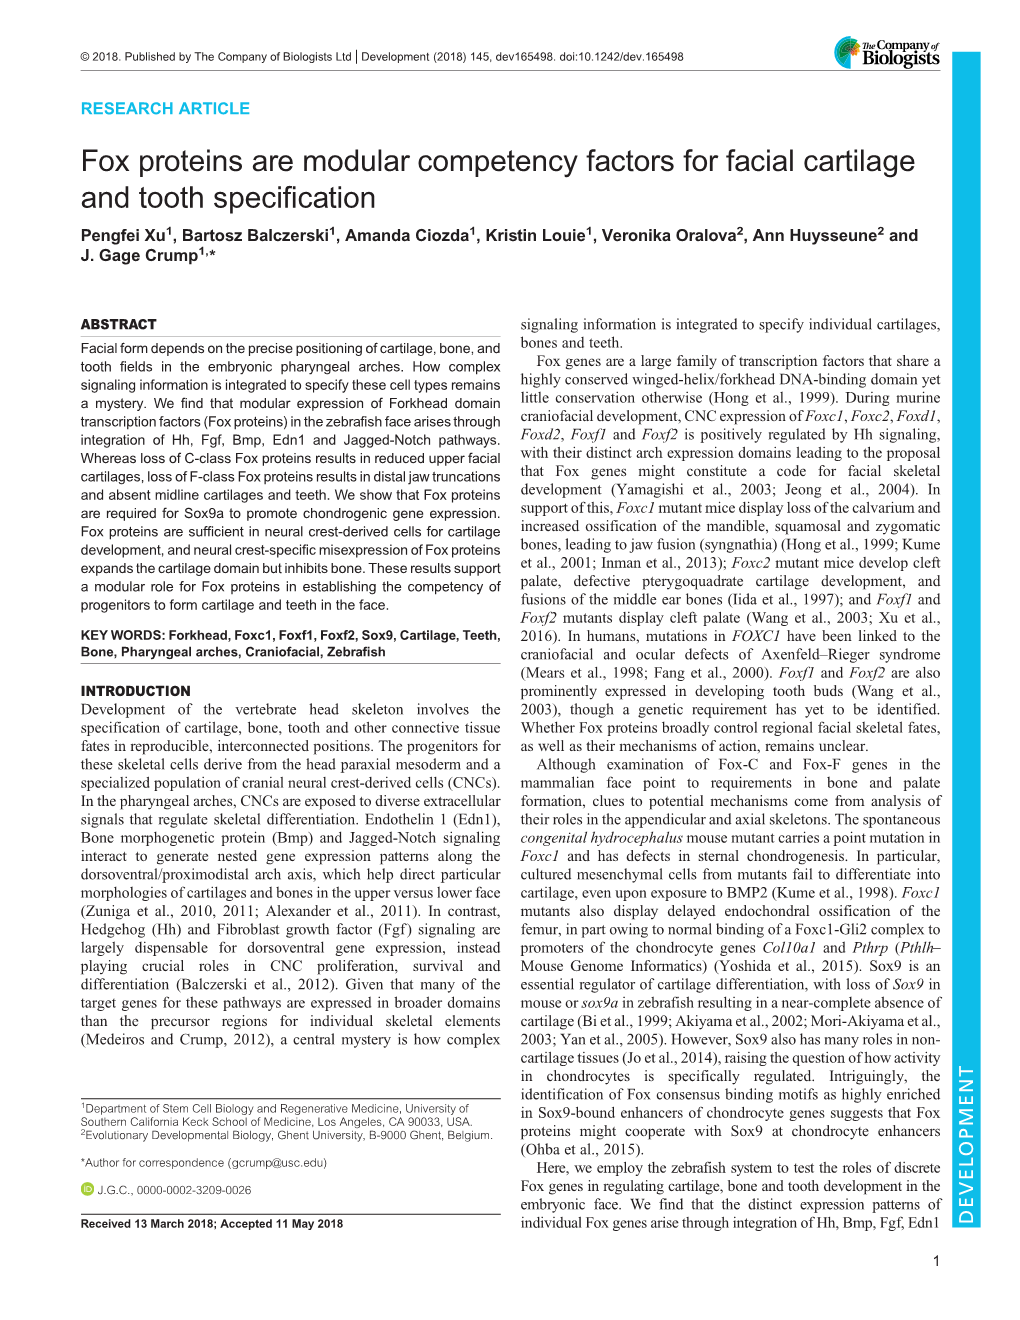 Fox Proteins Are Modular Competency Factors for Facial Cartilage and Tooth